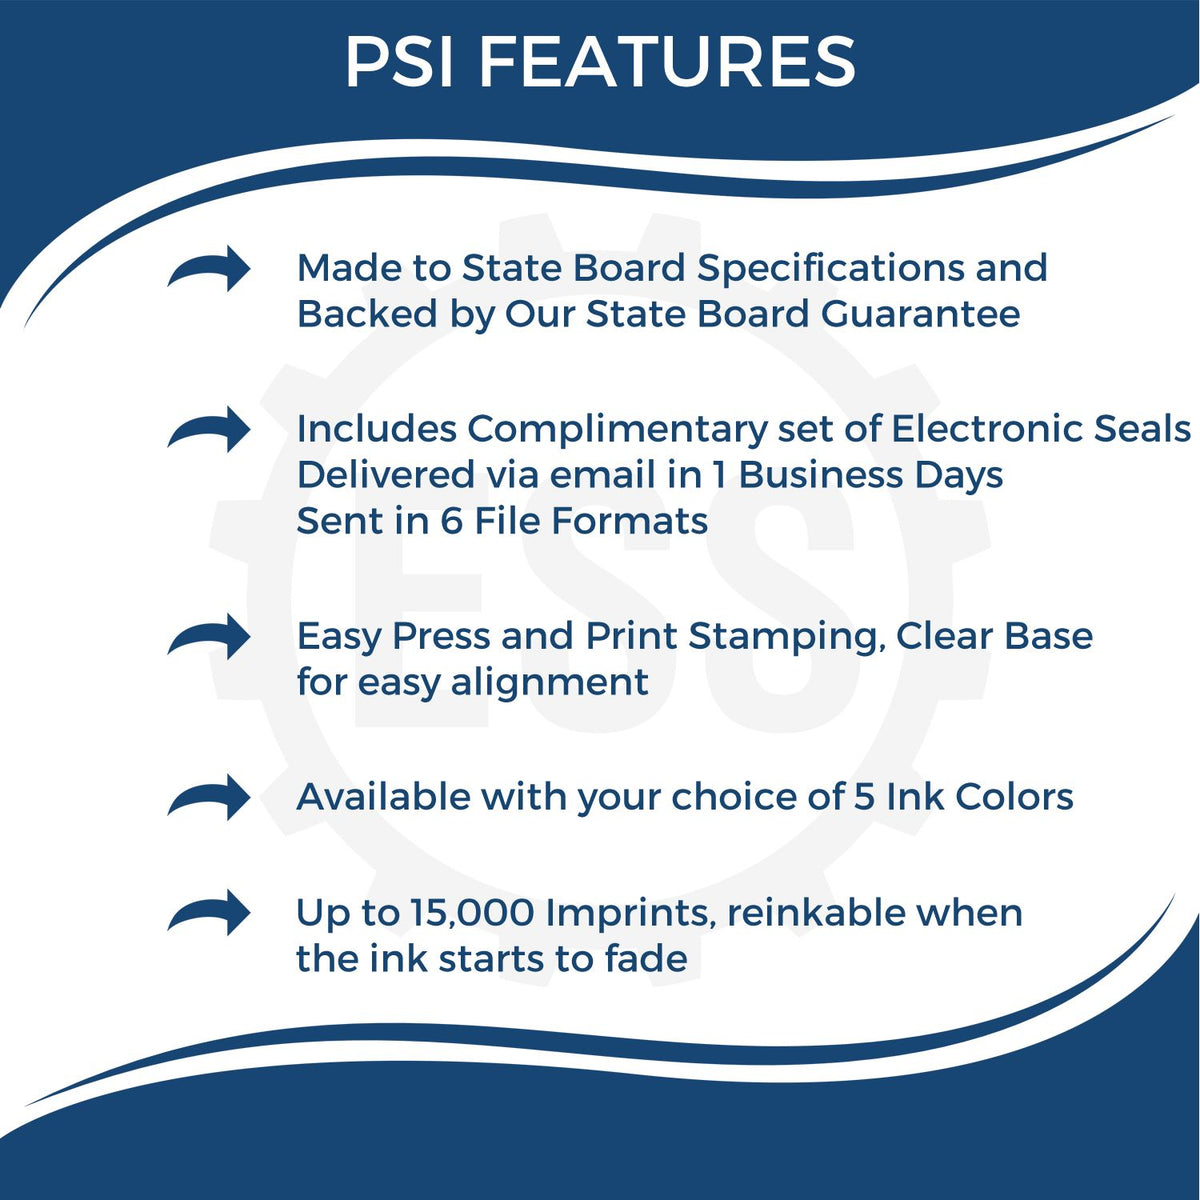 A picture of an infographic highlighting the selling points for the PSI Virginia Notary Stamp